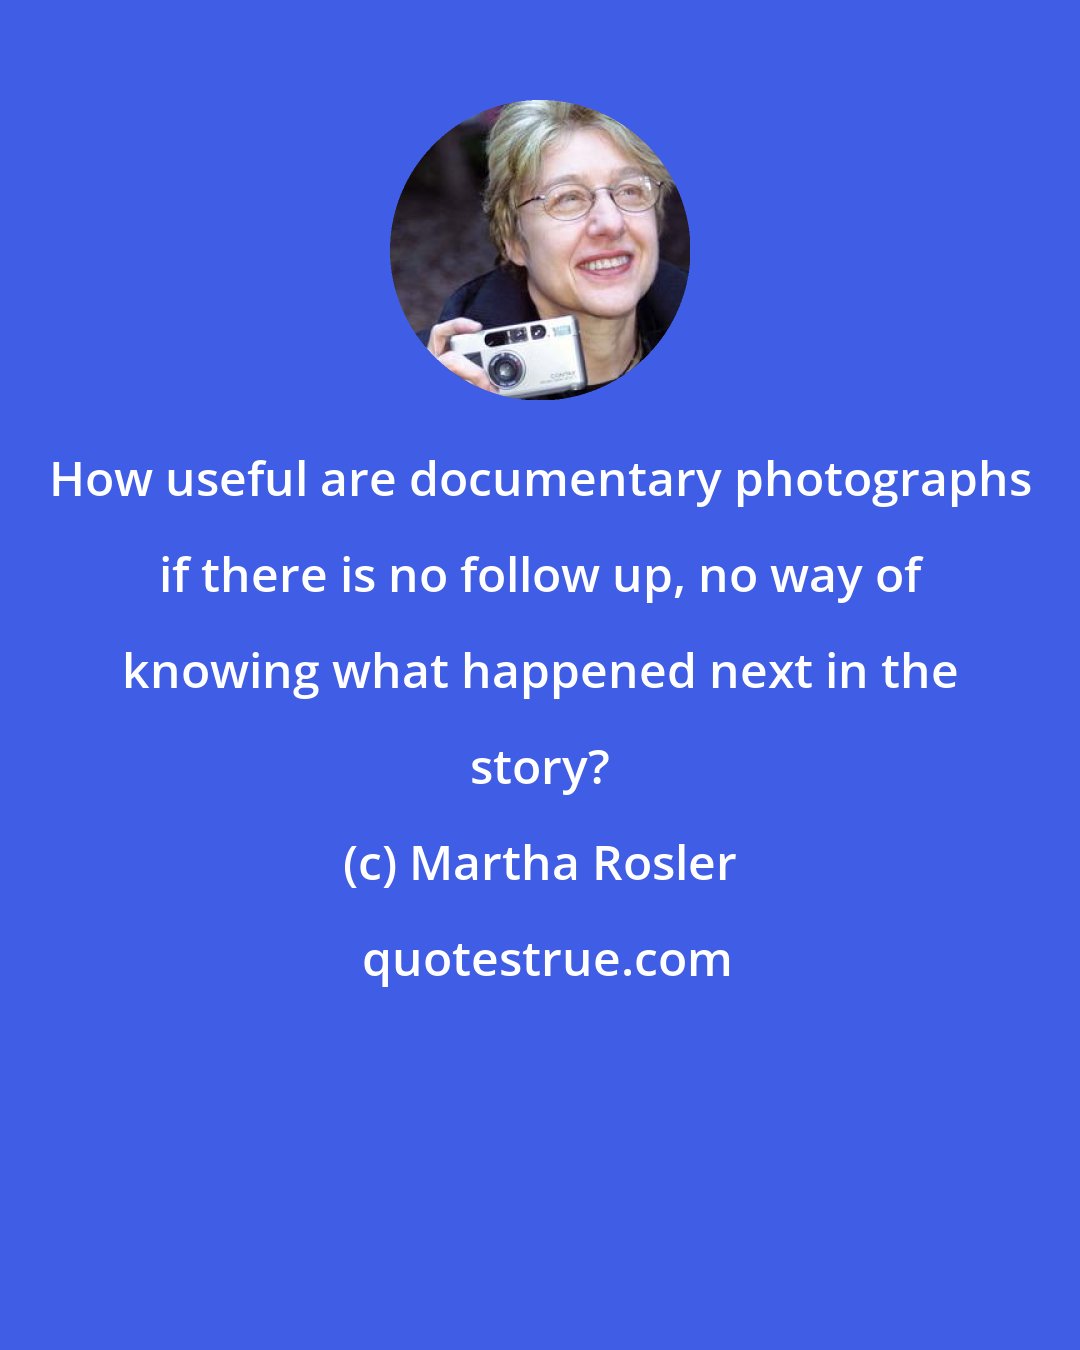 Martha Rosler: How useful are documentary photographs if there is no follow up, no way of knowing what happened next in the story?